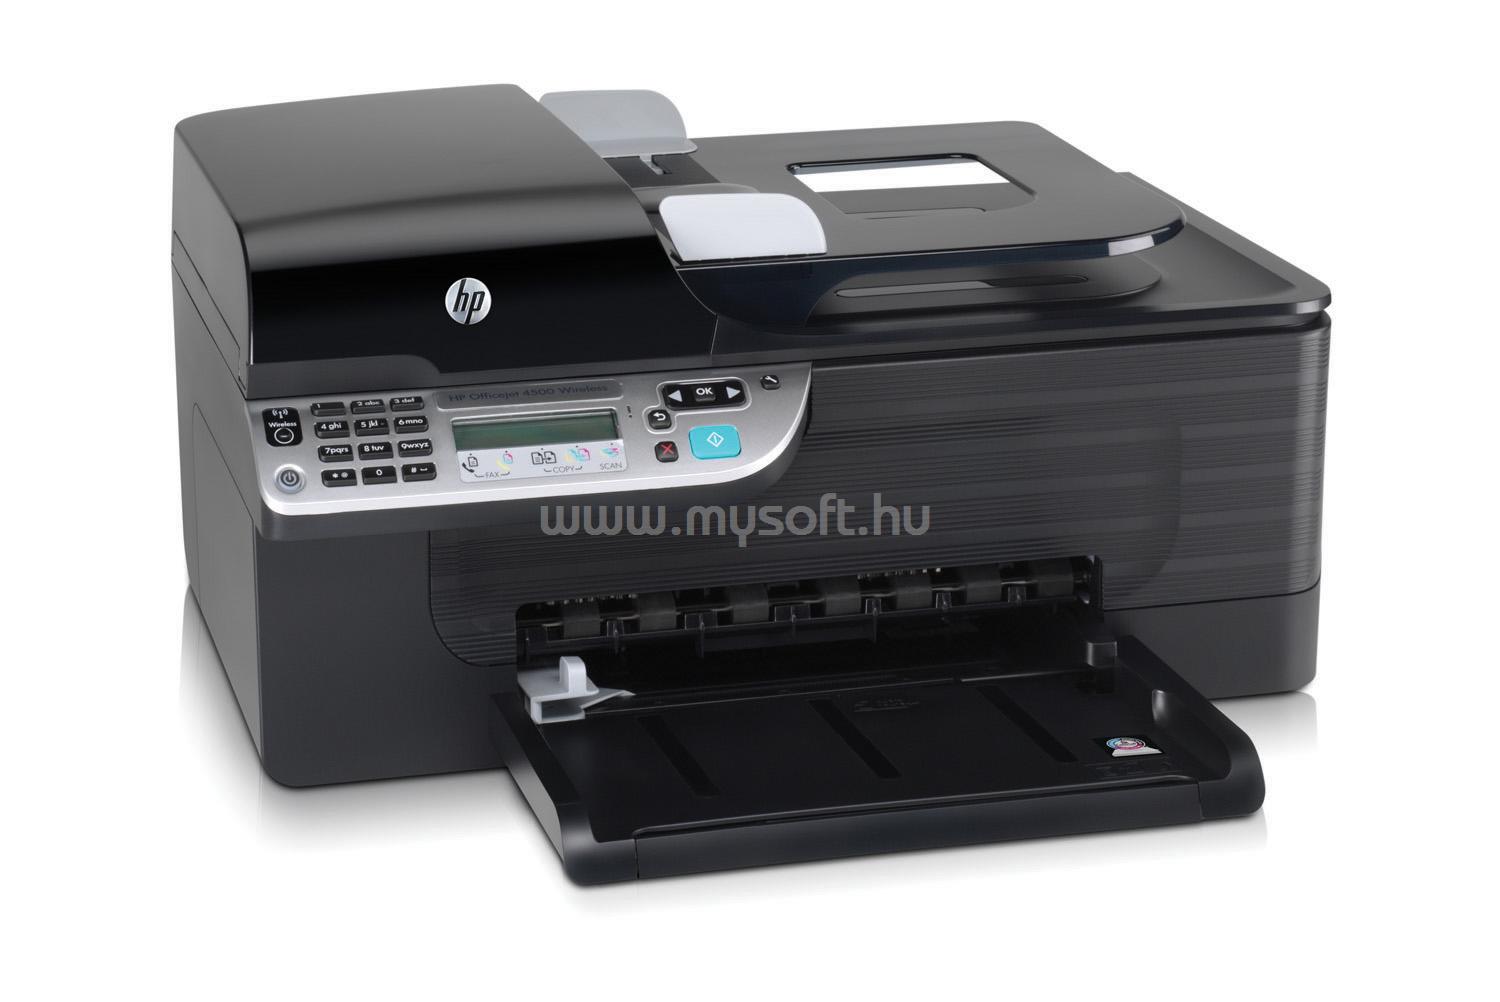 Hp Officejet 4500 All-In-One Printer - G510g Manual